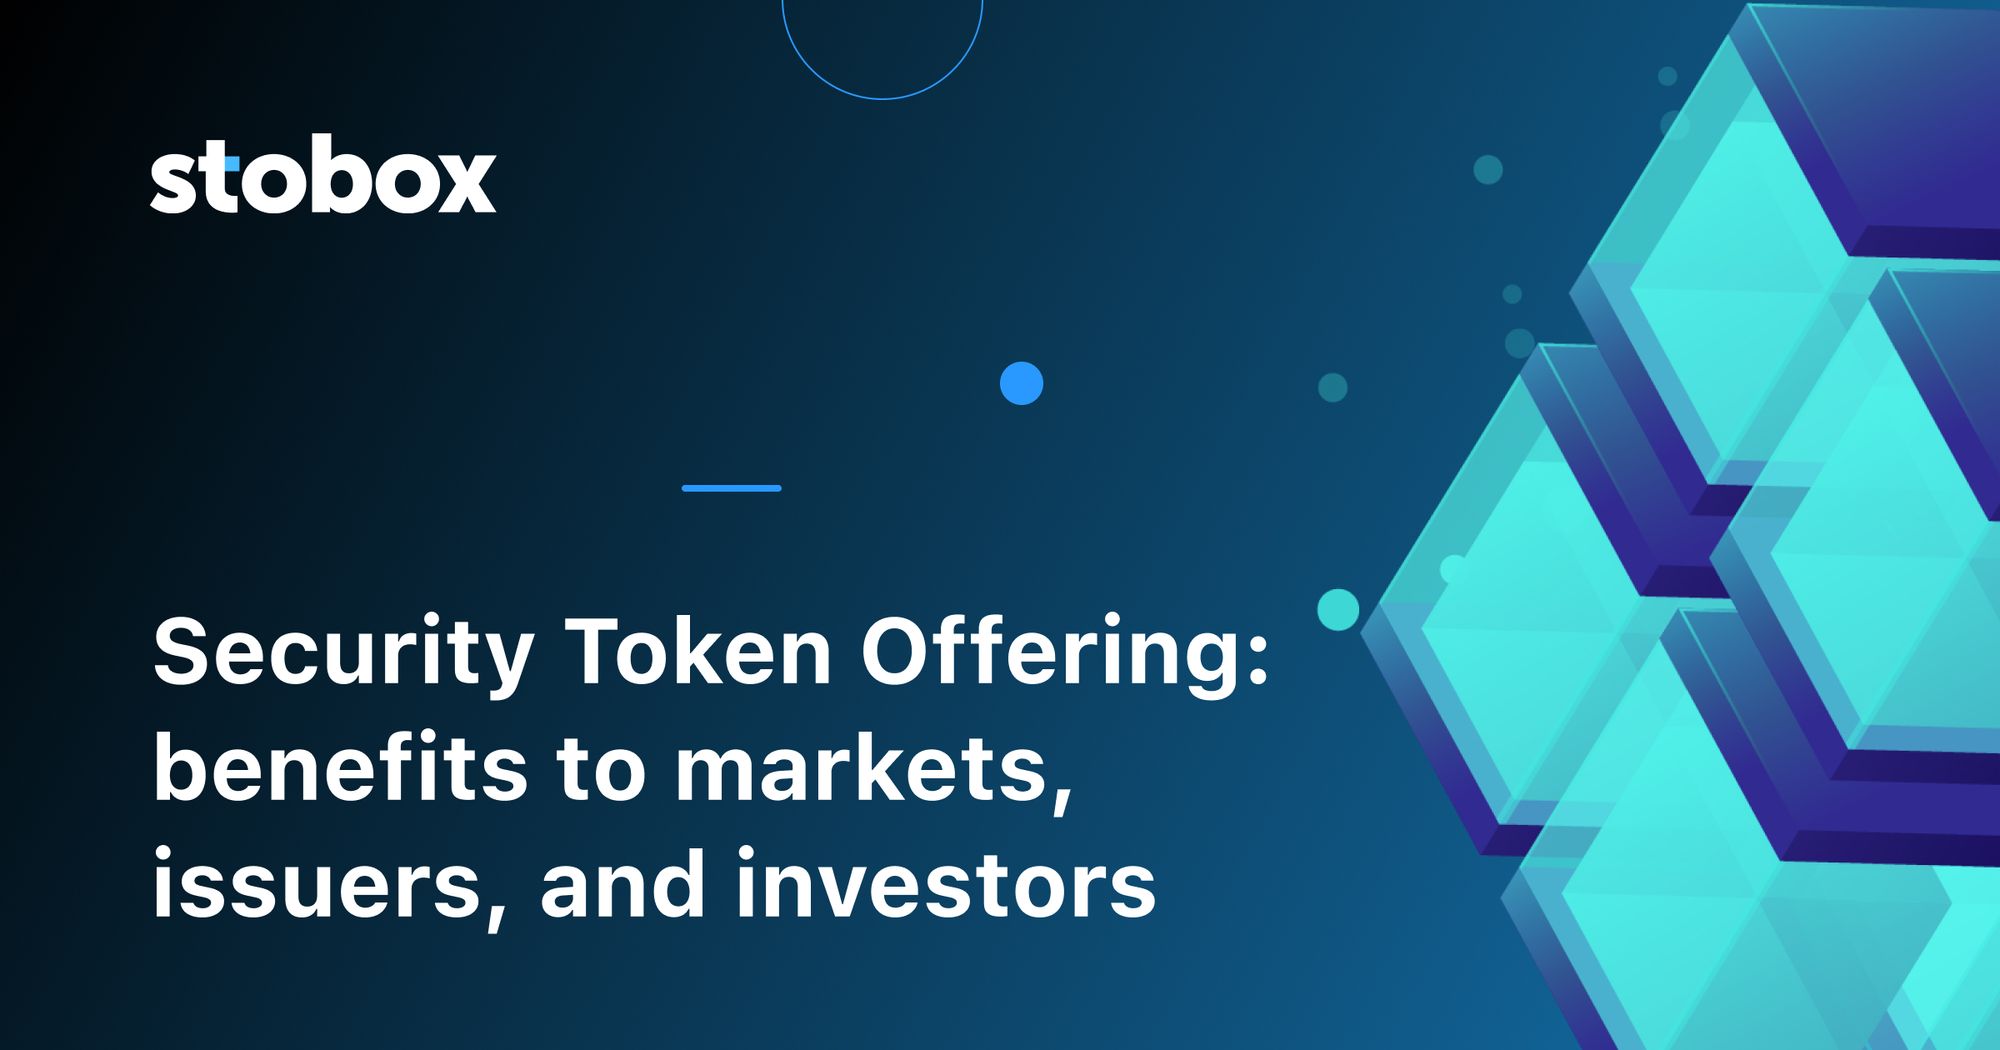 Security Token Offering: benefits to markets, issuers, and investors